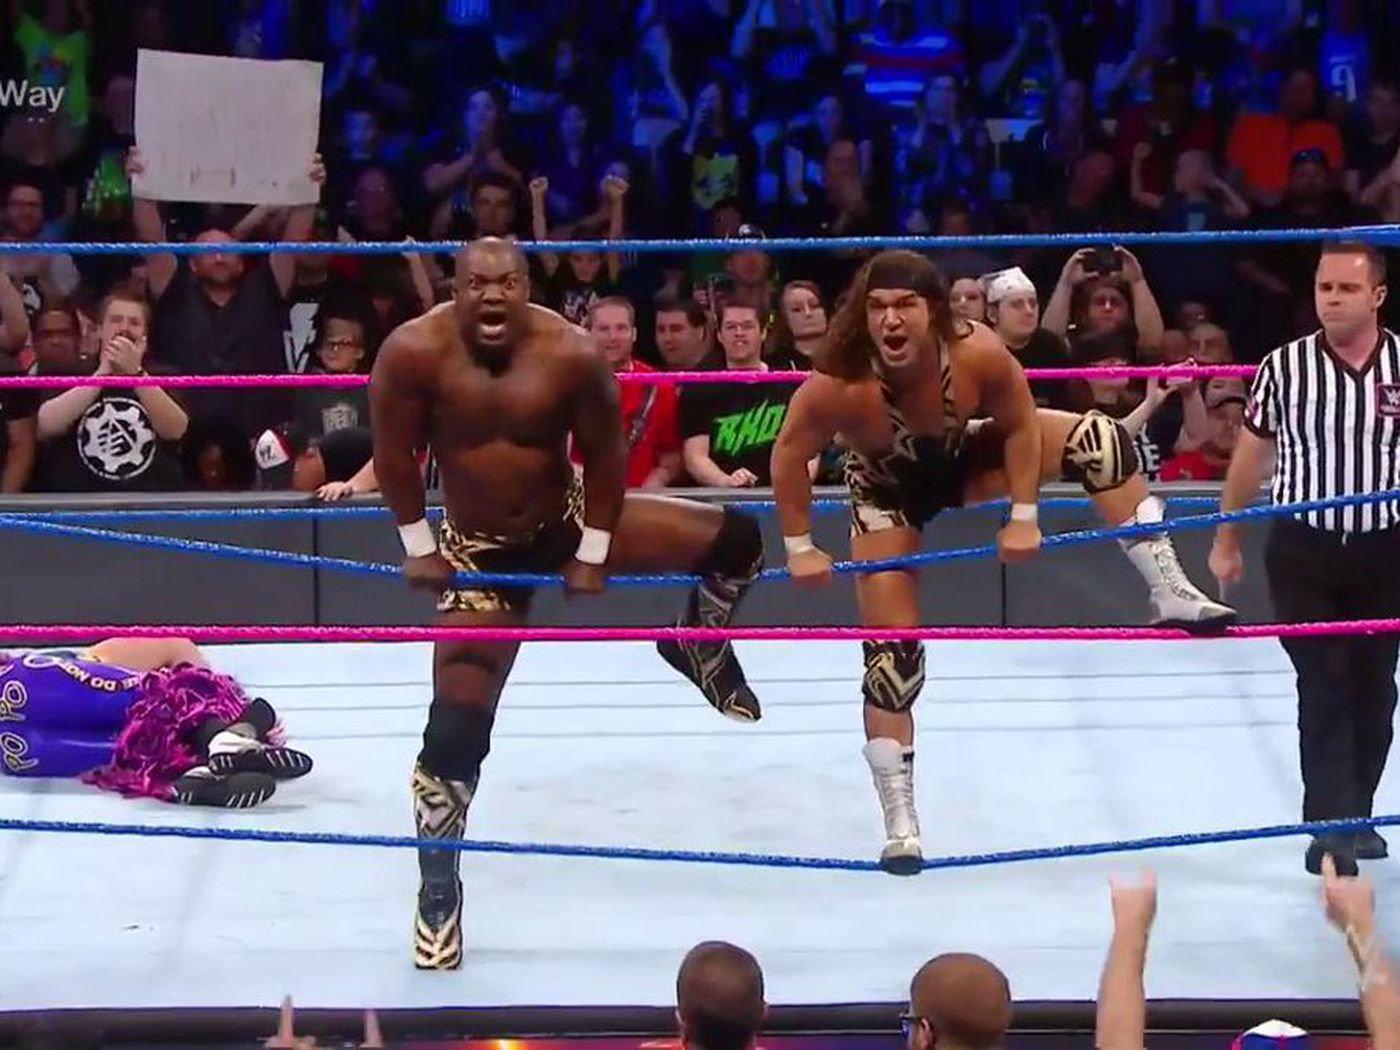 Chad Gable and Shelton Benjamin win fatal fourway to earn shot at Usos